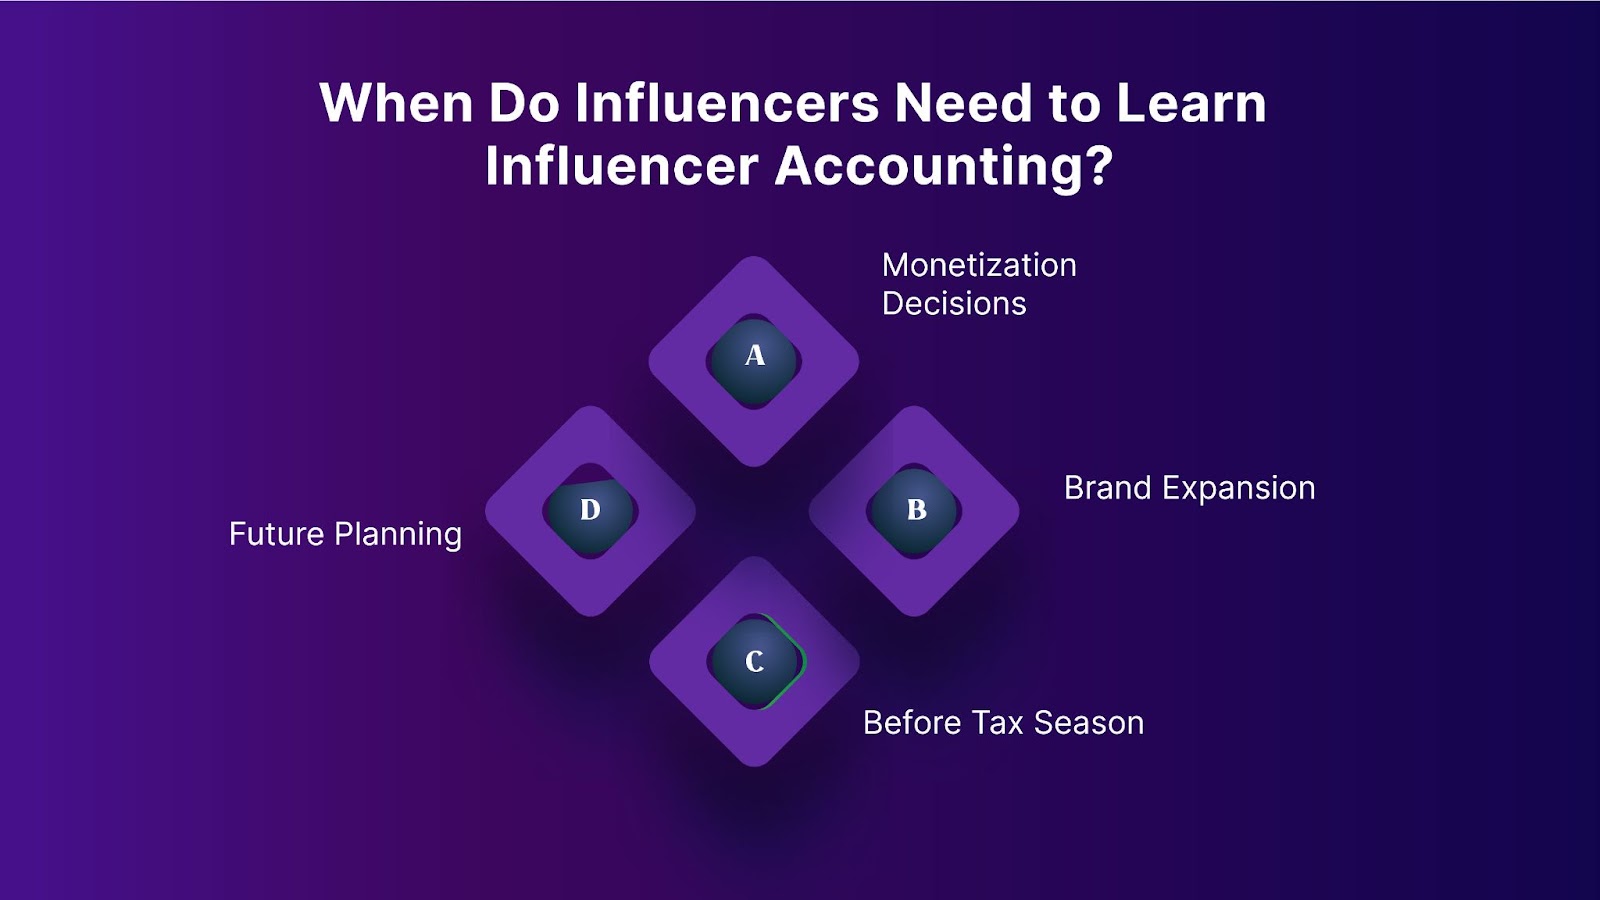 When Do Influencers Need to Learn Influencer Accounting?